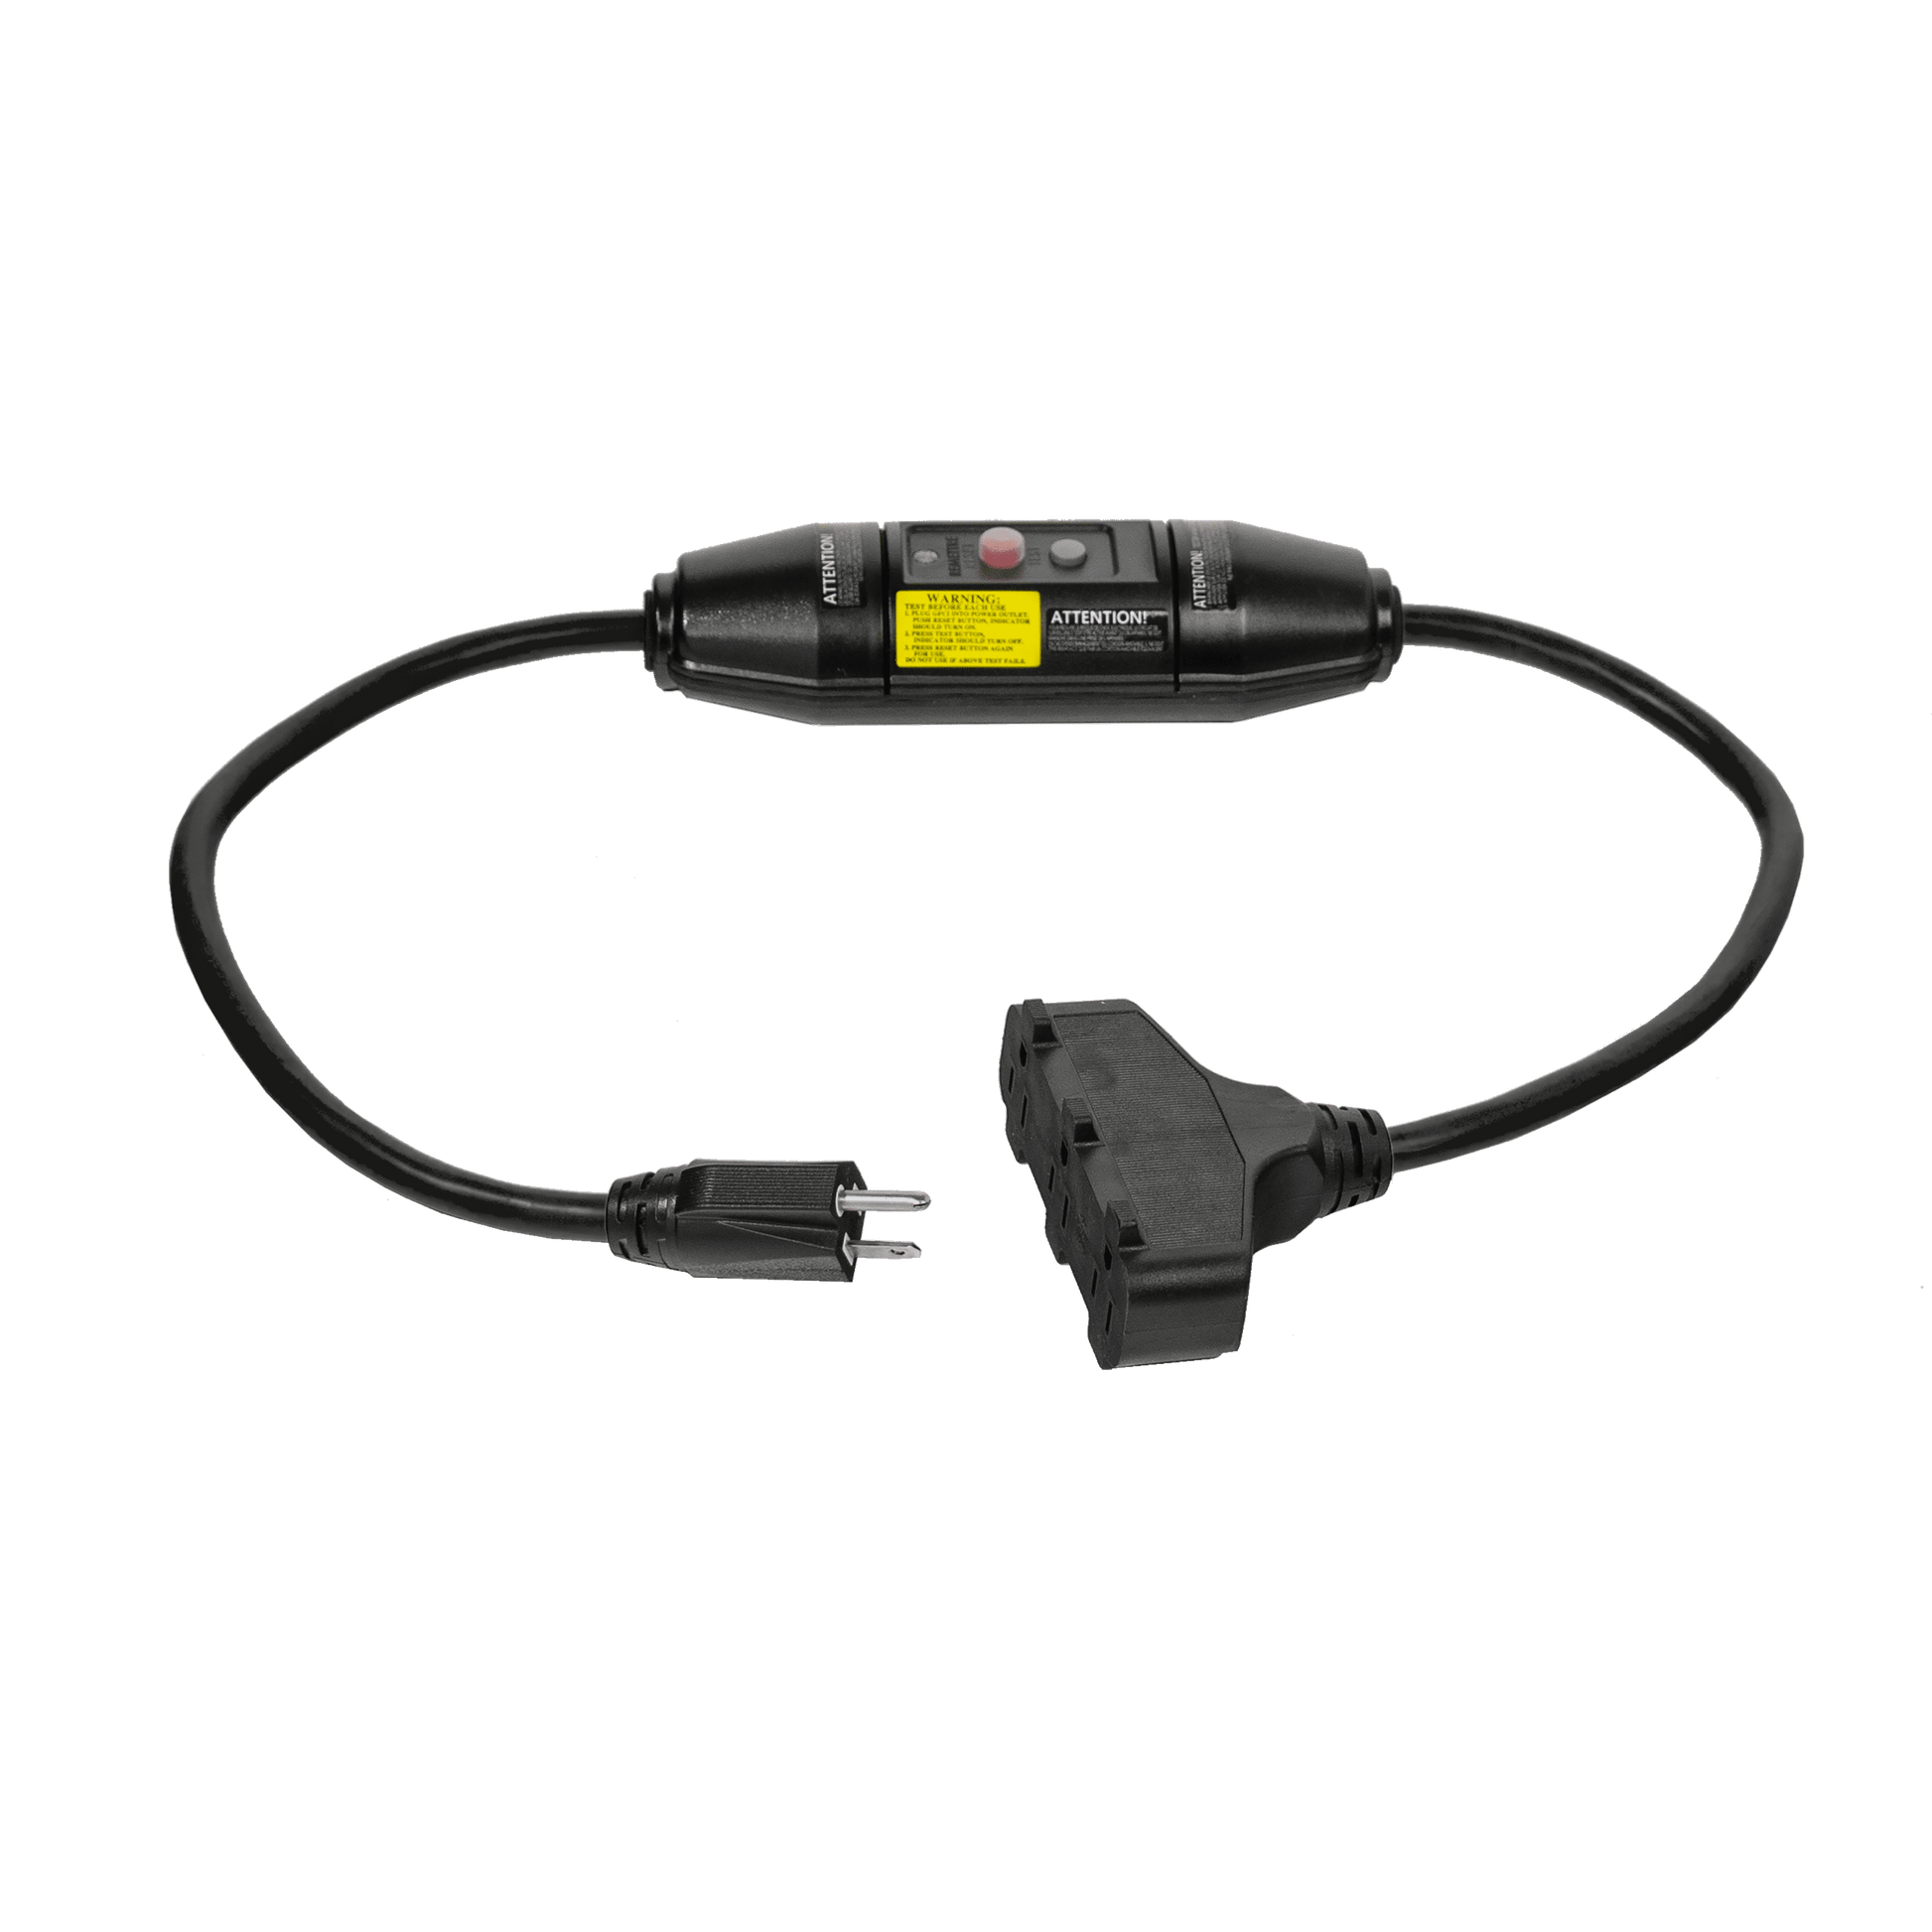 Stinger Electrical Extension Cord 25′ & 50′ & 100′